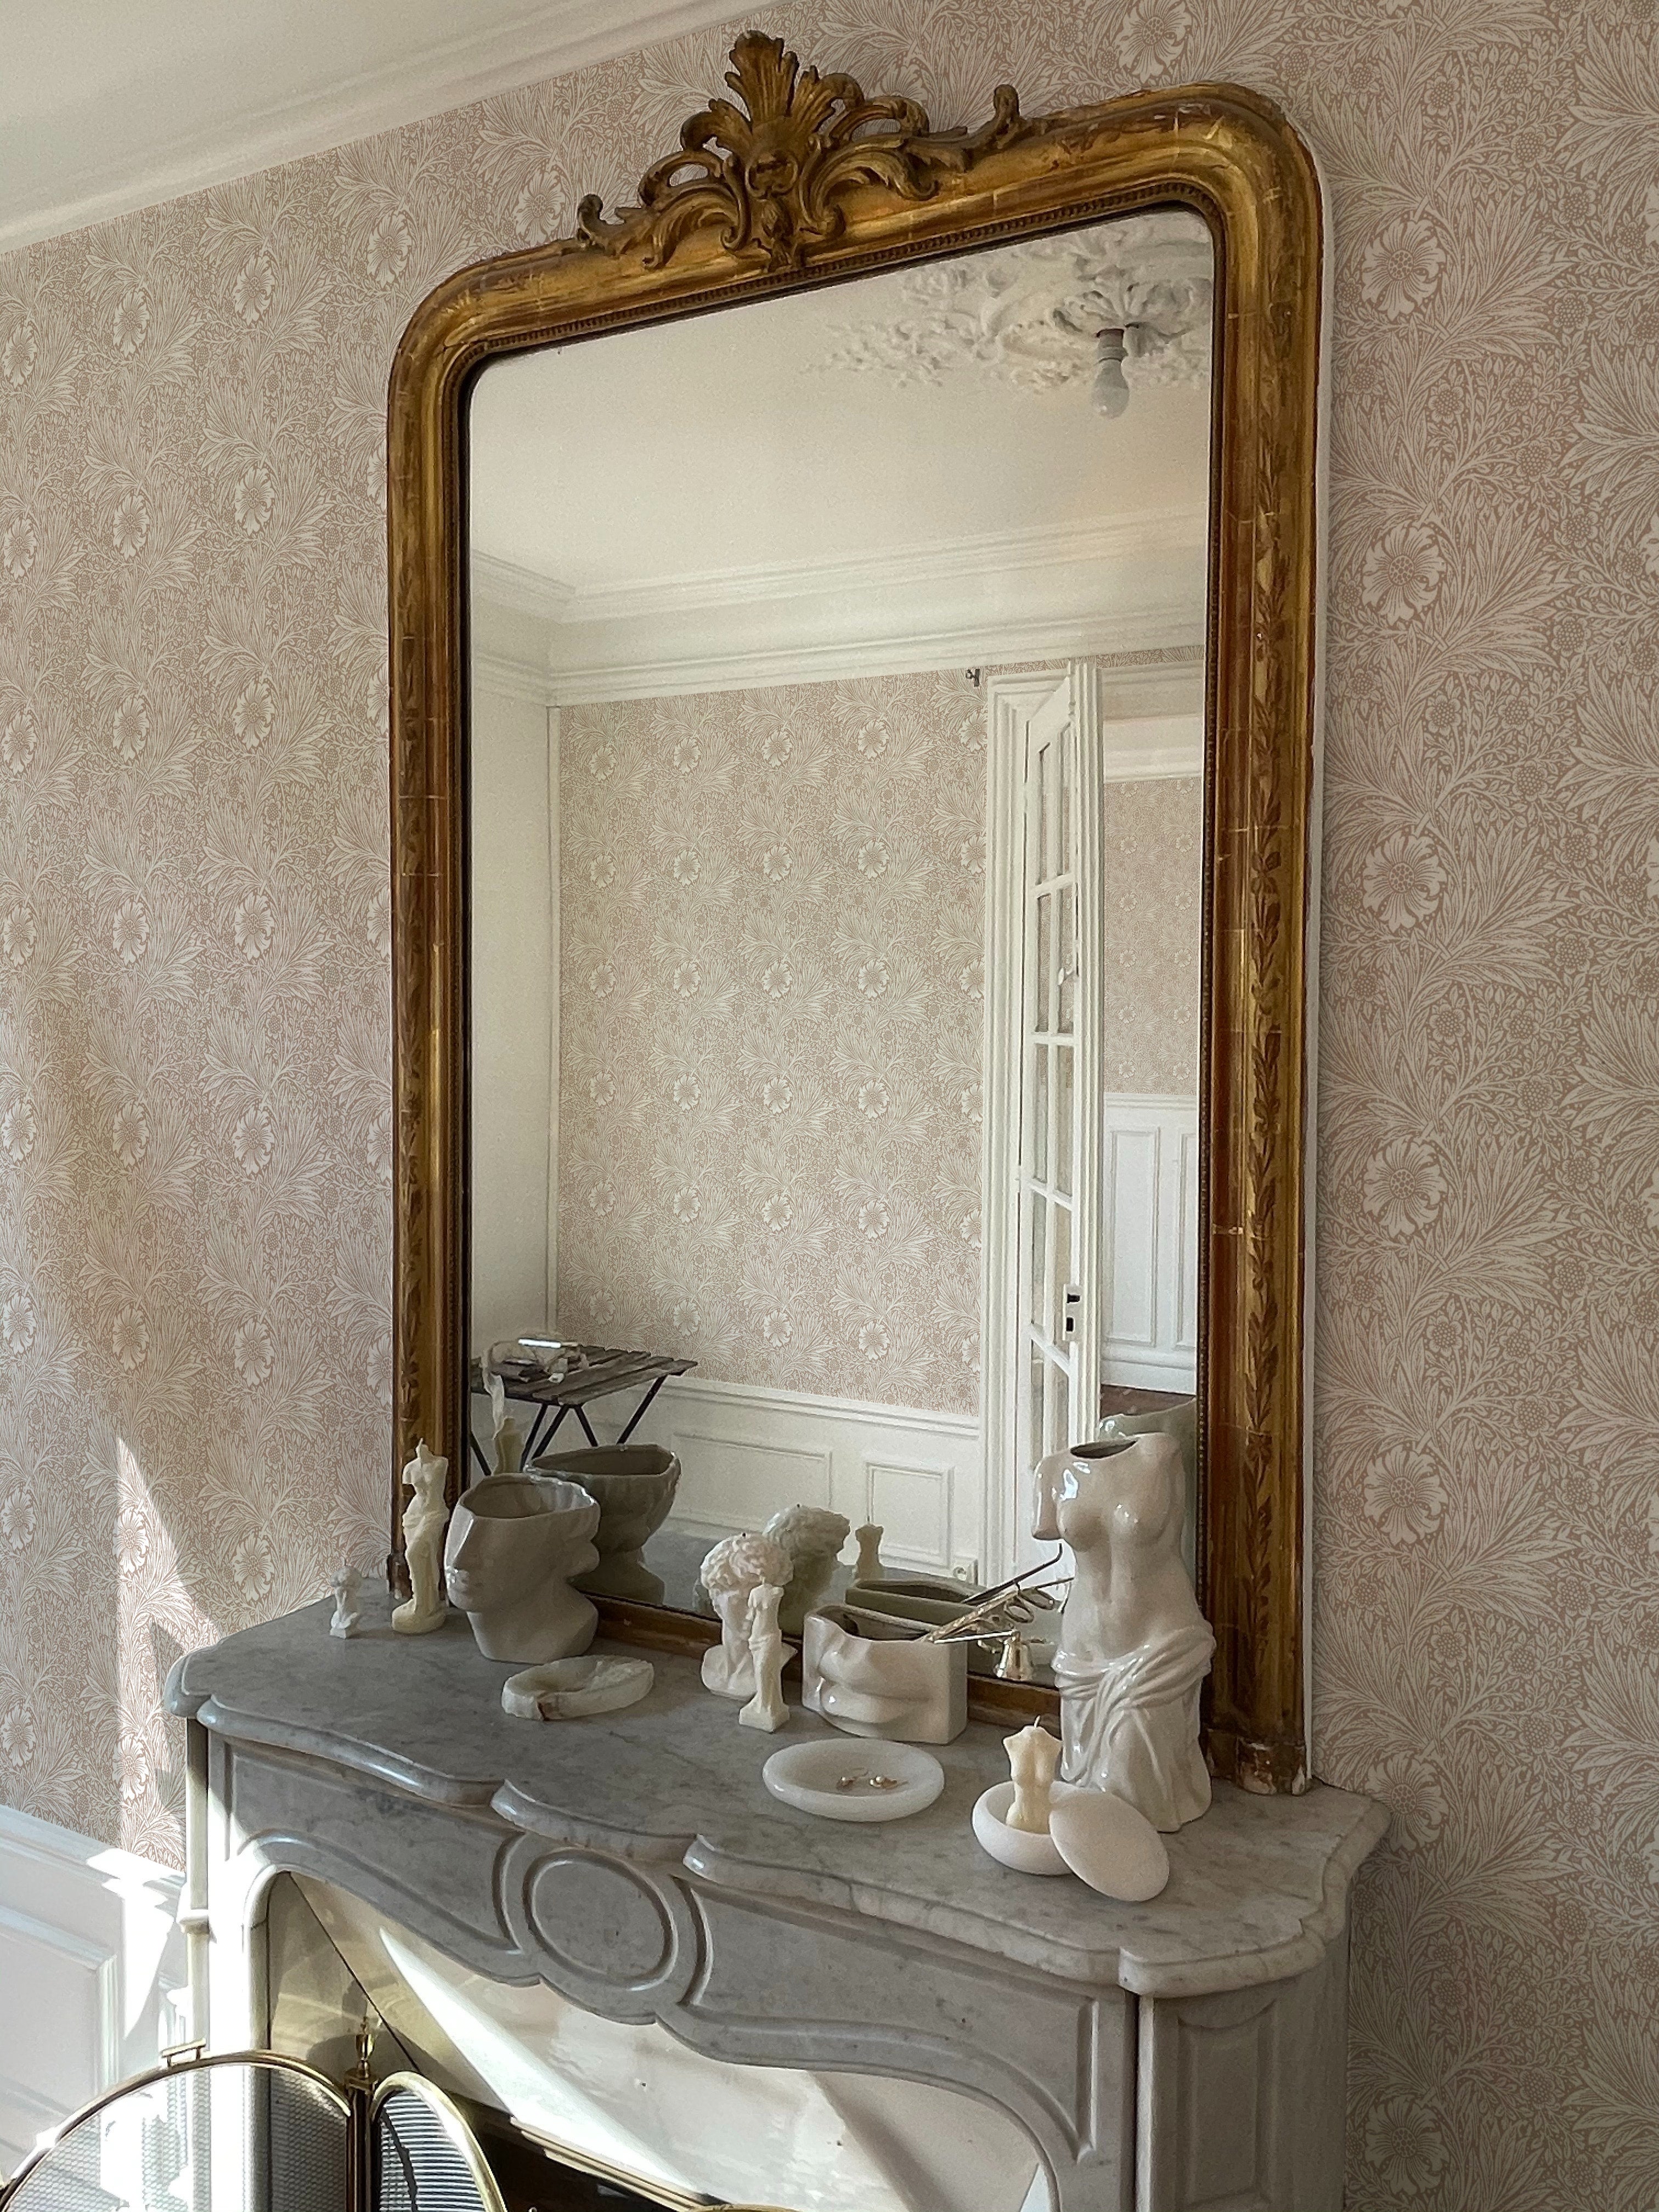 Charming dressing area featuring Timeless Floral Wallpaper with beige floral patterns, adding a vintage flair to the ornate mirror and decorative fireplace.